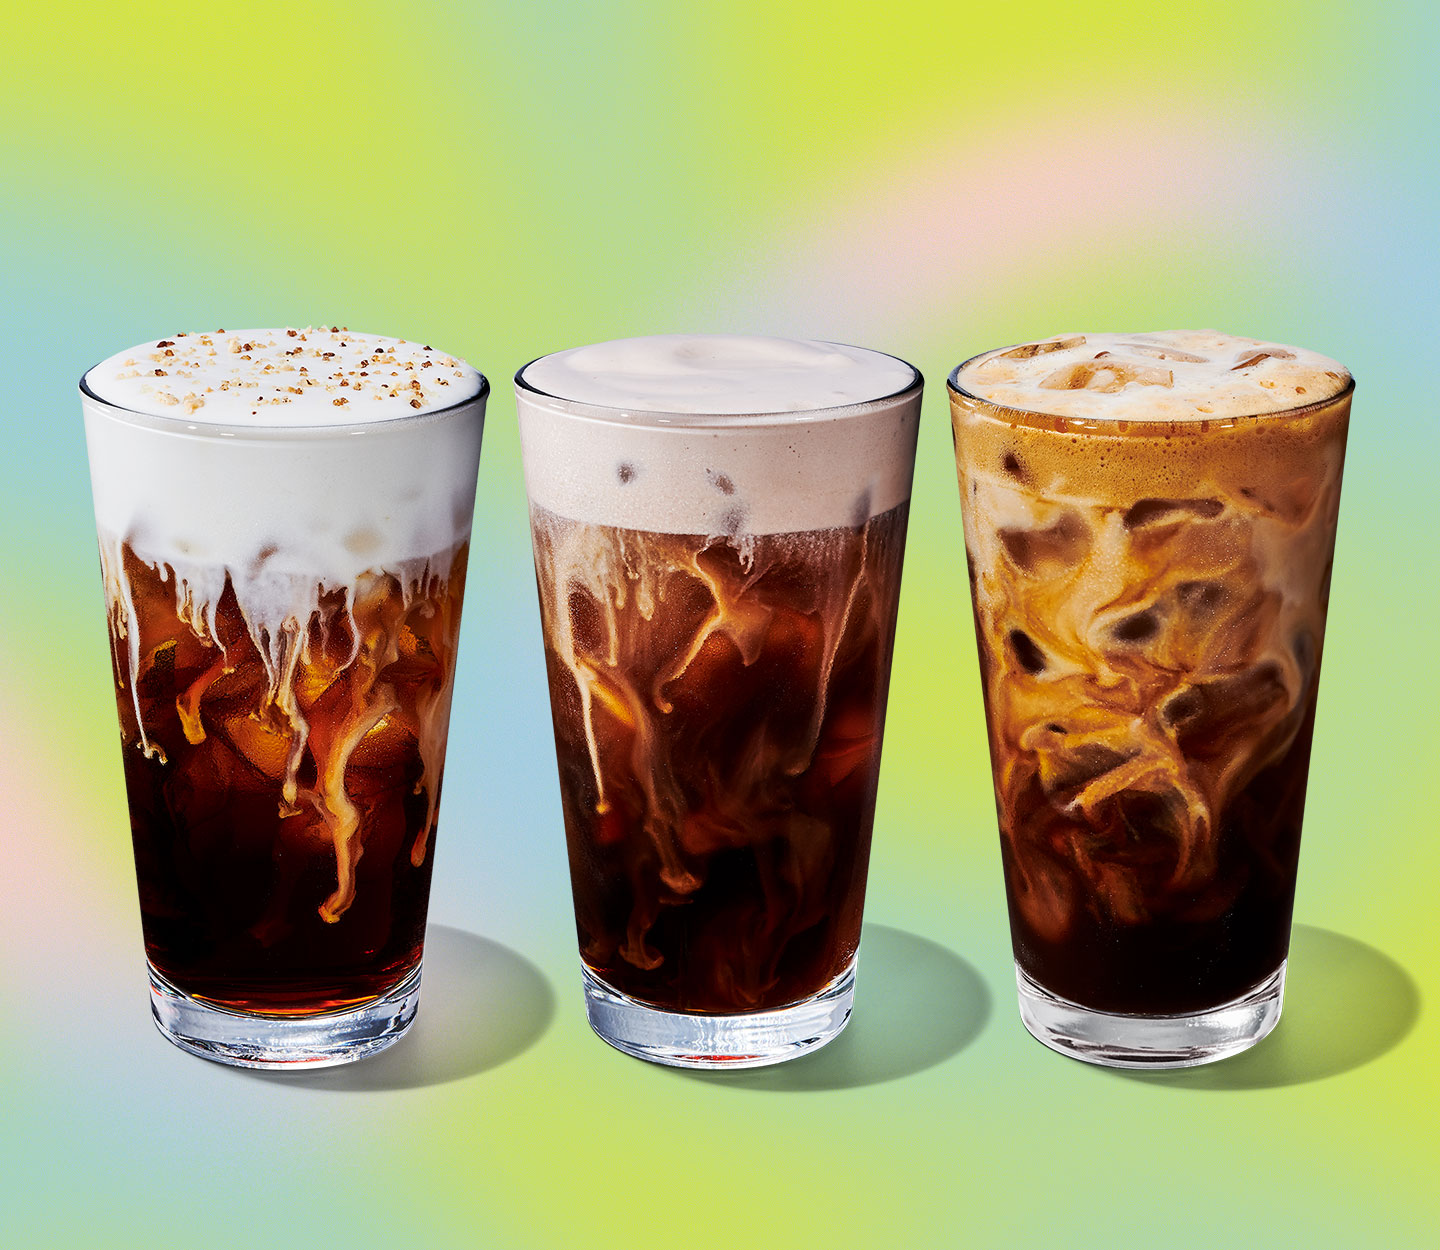 Three cold coffee drinks in tall glasses sitting side by side. The first two have a creamy topping and the third shows creaminess throughout the drink.